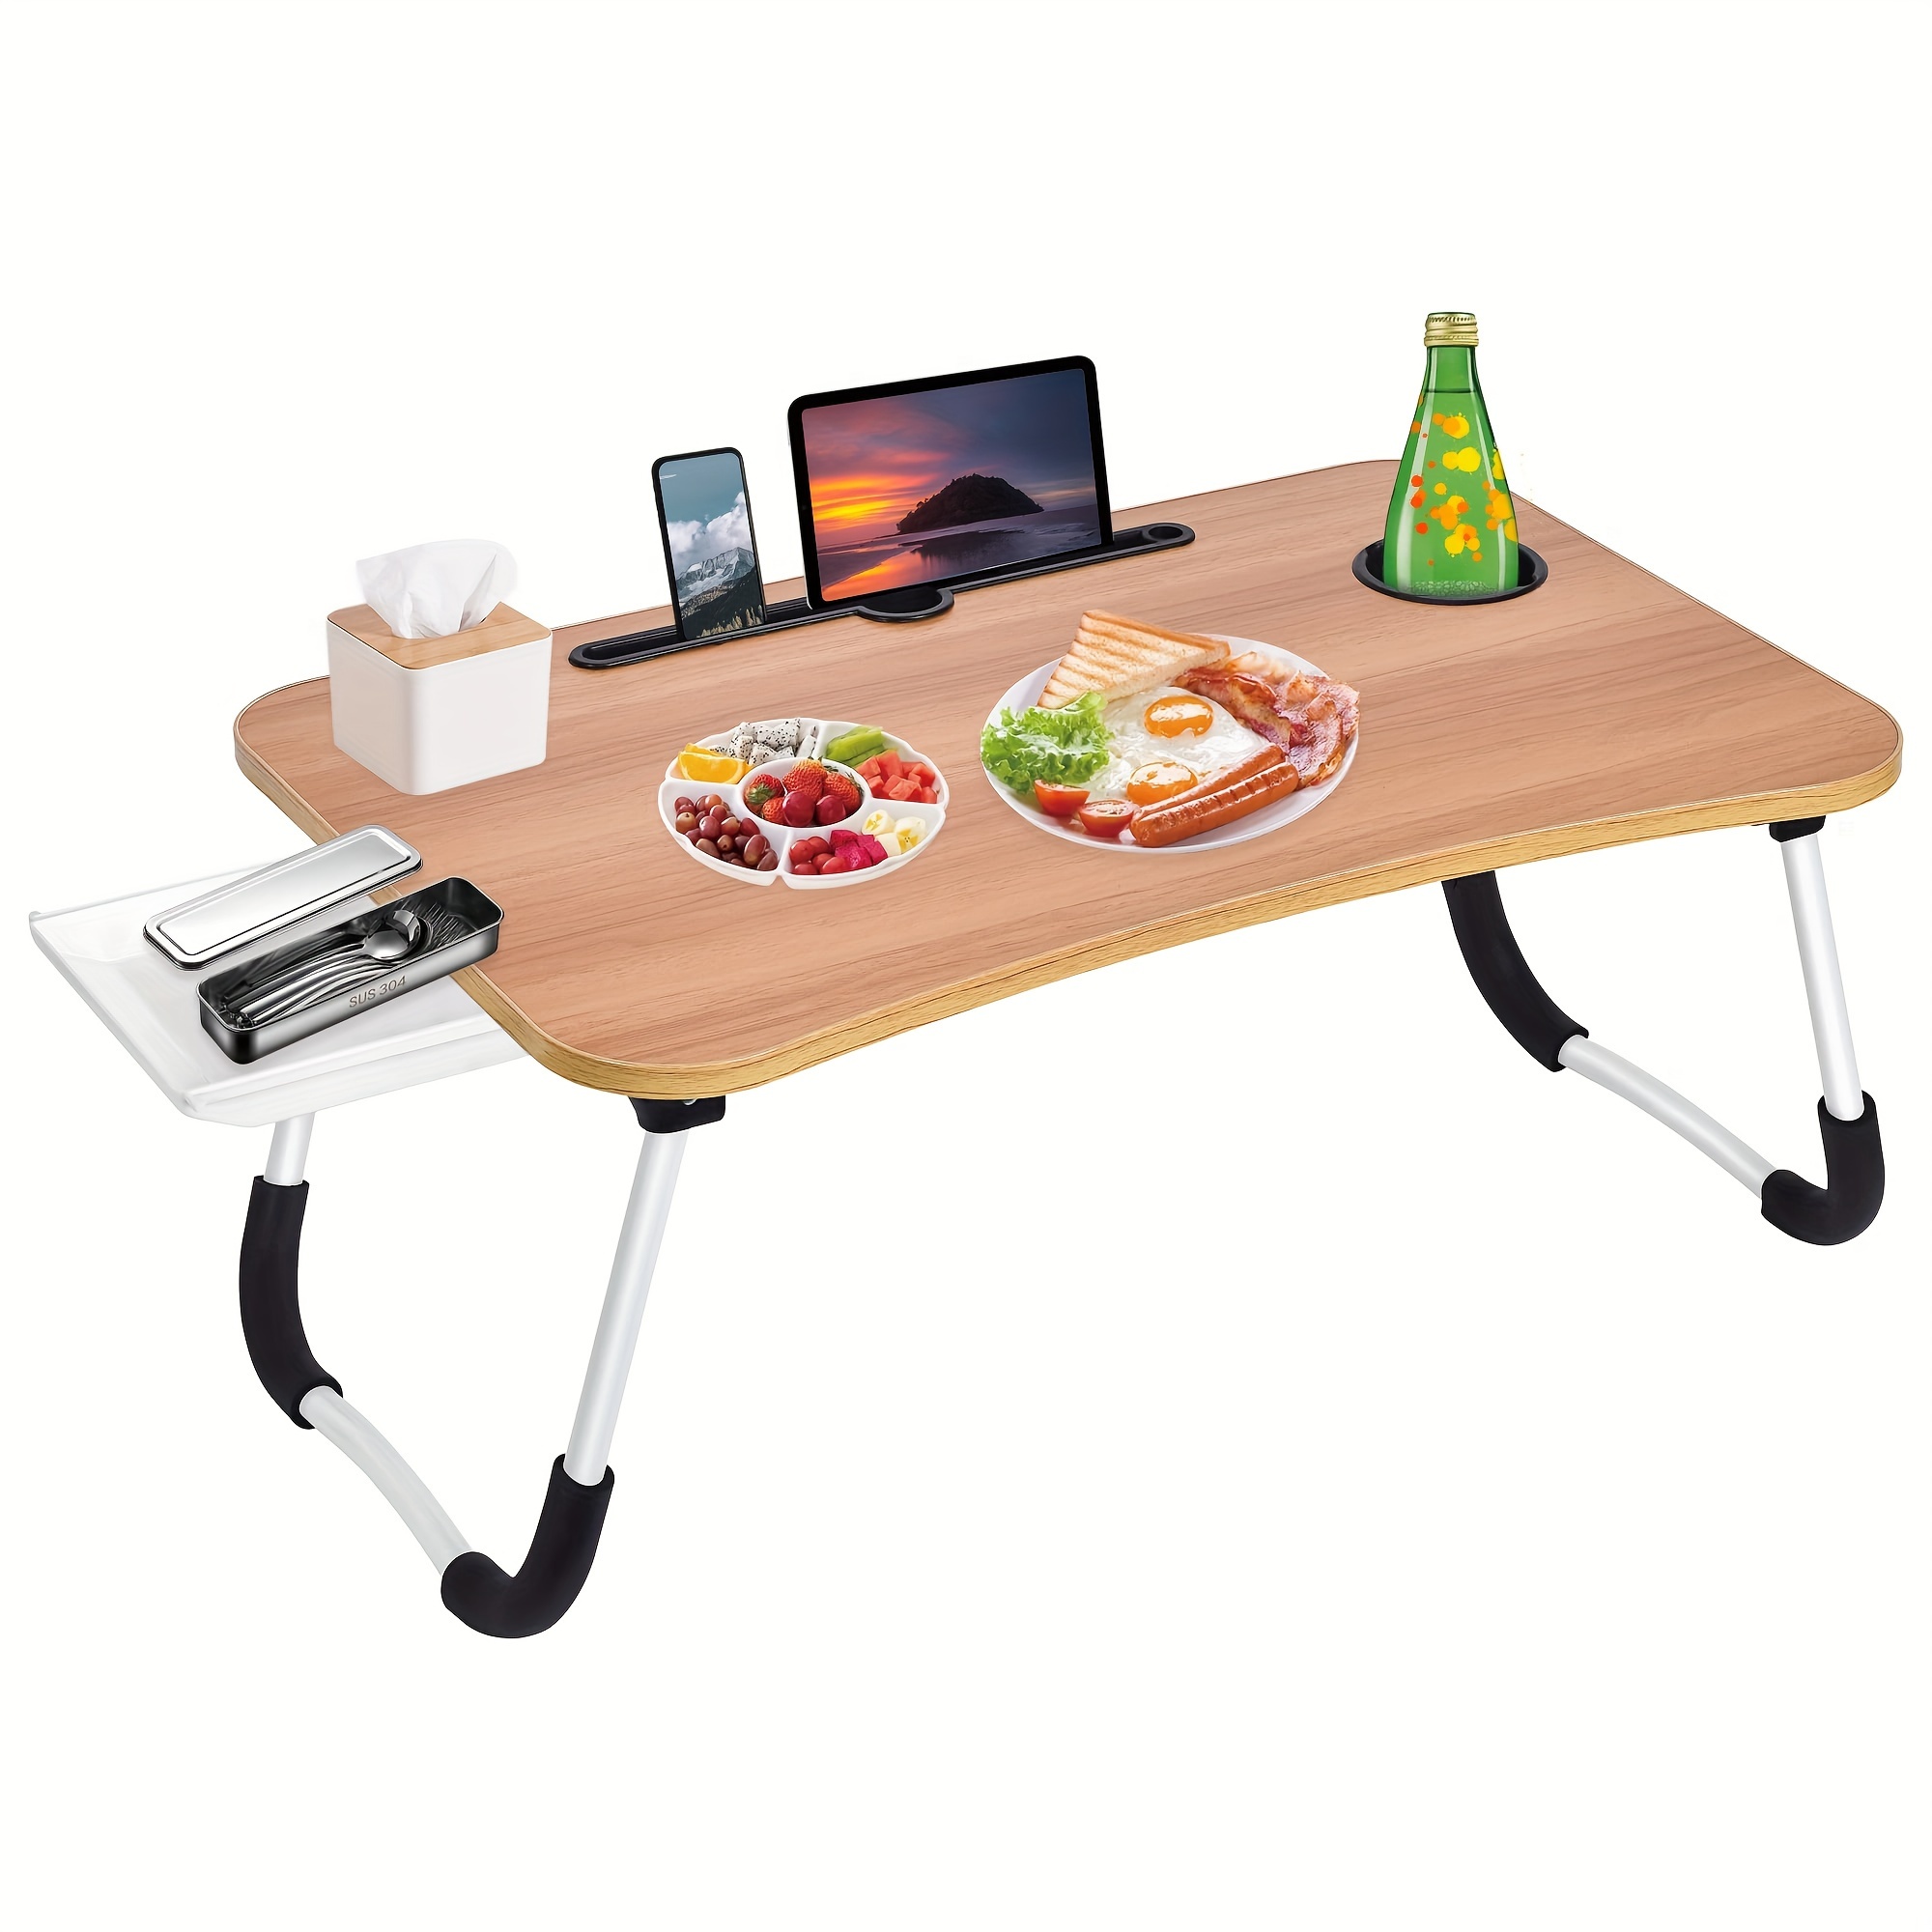 

Laptop Rollaway Bed Table, Foldable Lap Table With Cup Holder, Drawer, Tablet Stand Laptop Bed Tray Table, Portable Lap Table With Foldable Legs For Working, Eating, Reading And Writing